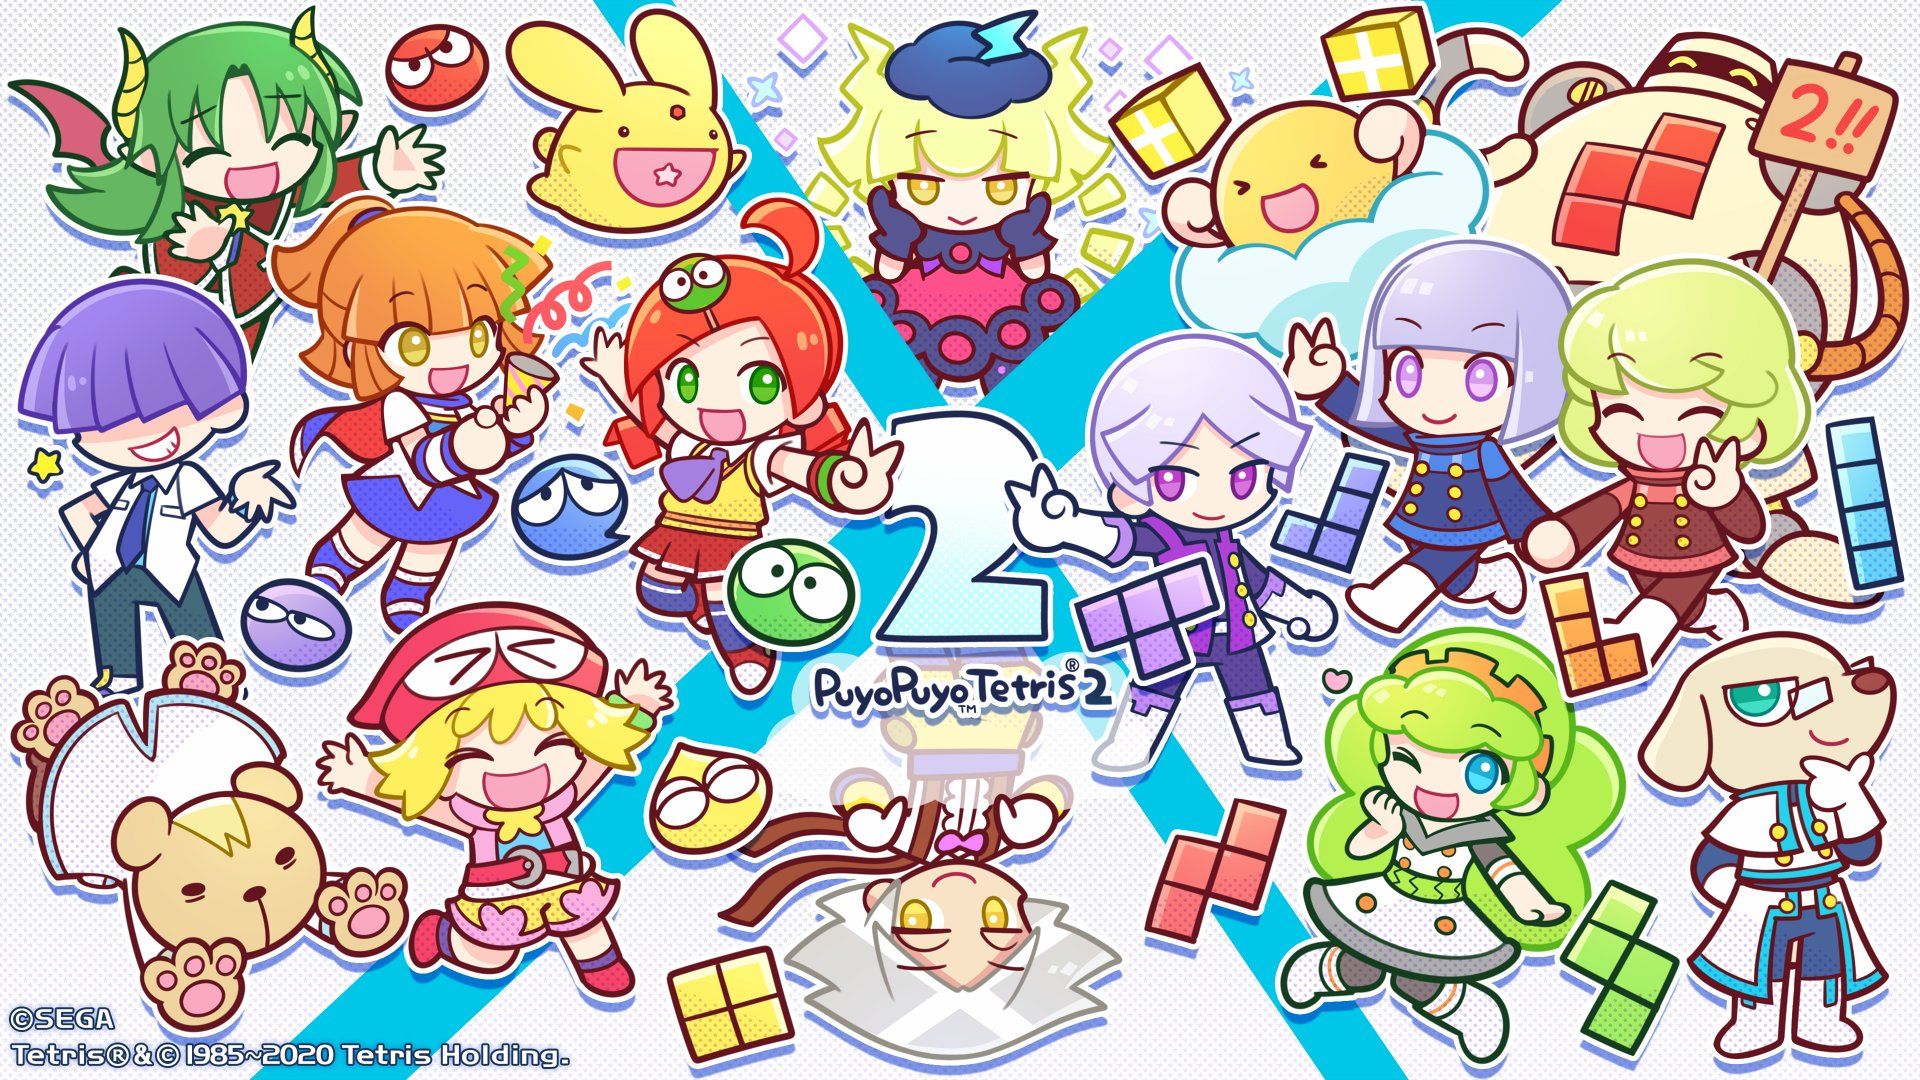 Official artwork released to celebrate the launch of Puyo Puyo Tetris 2